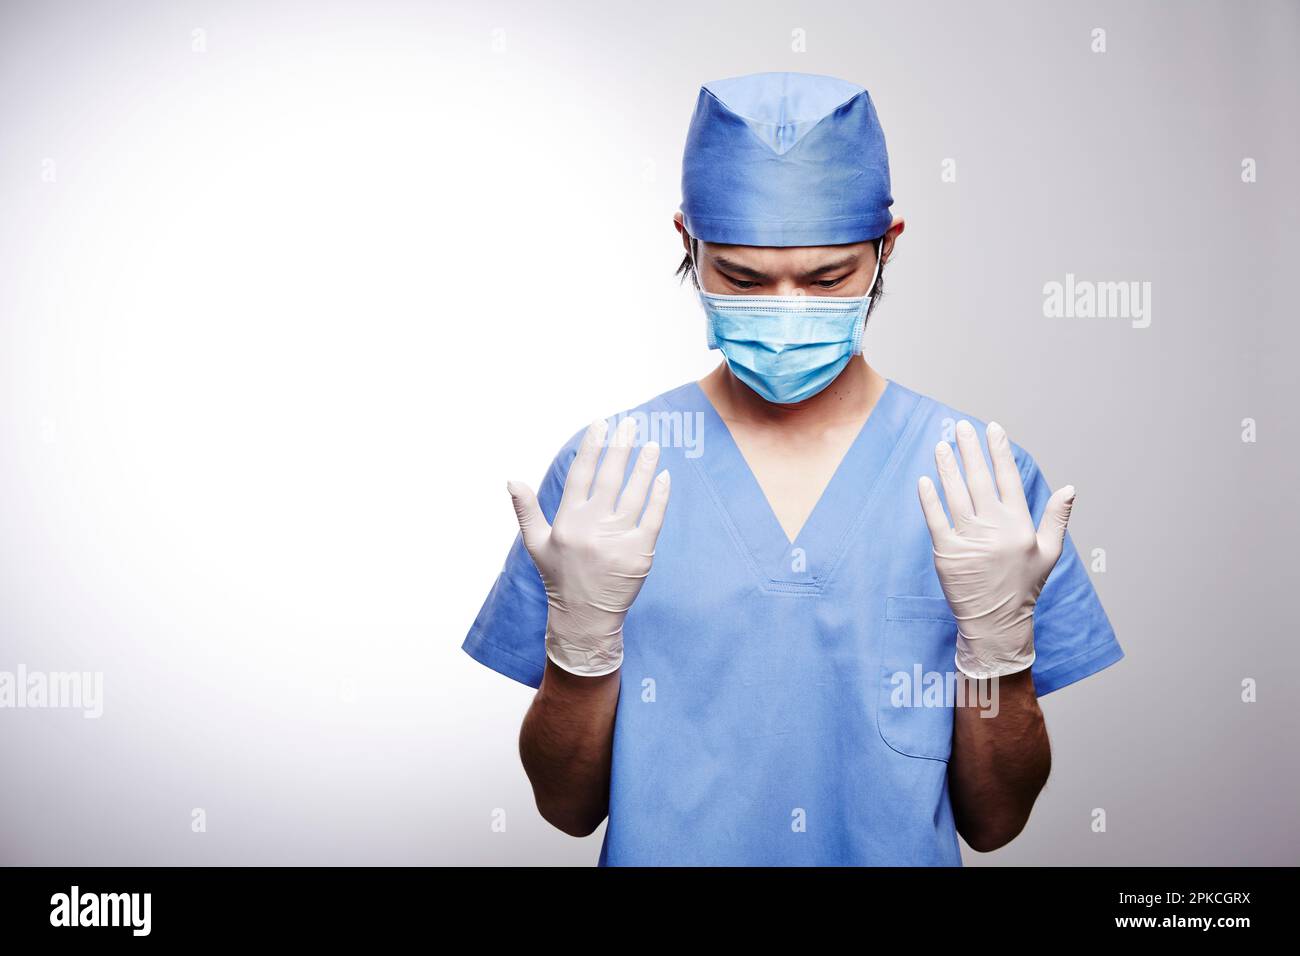 Male doctor wearing a surgical suit Stock Photo